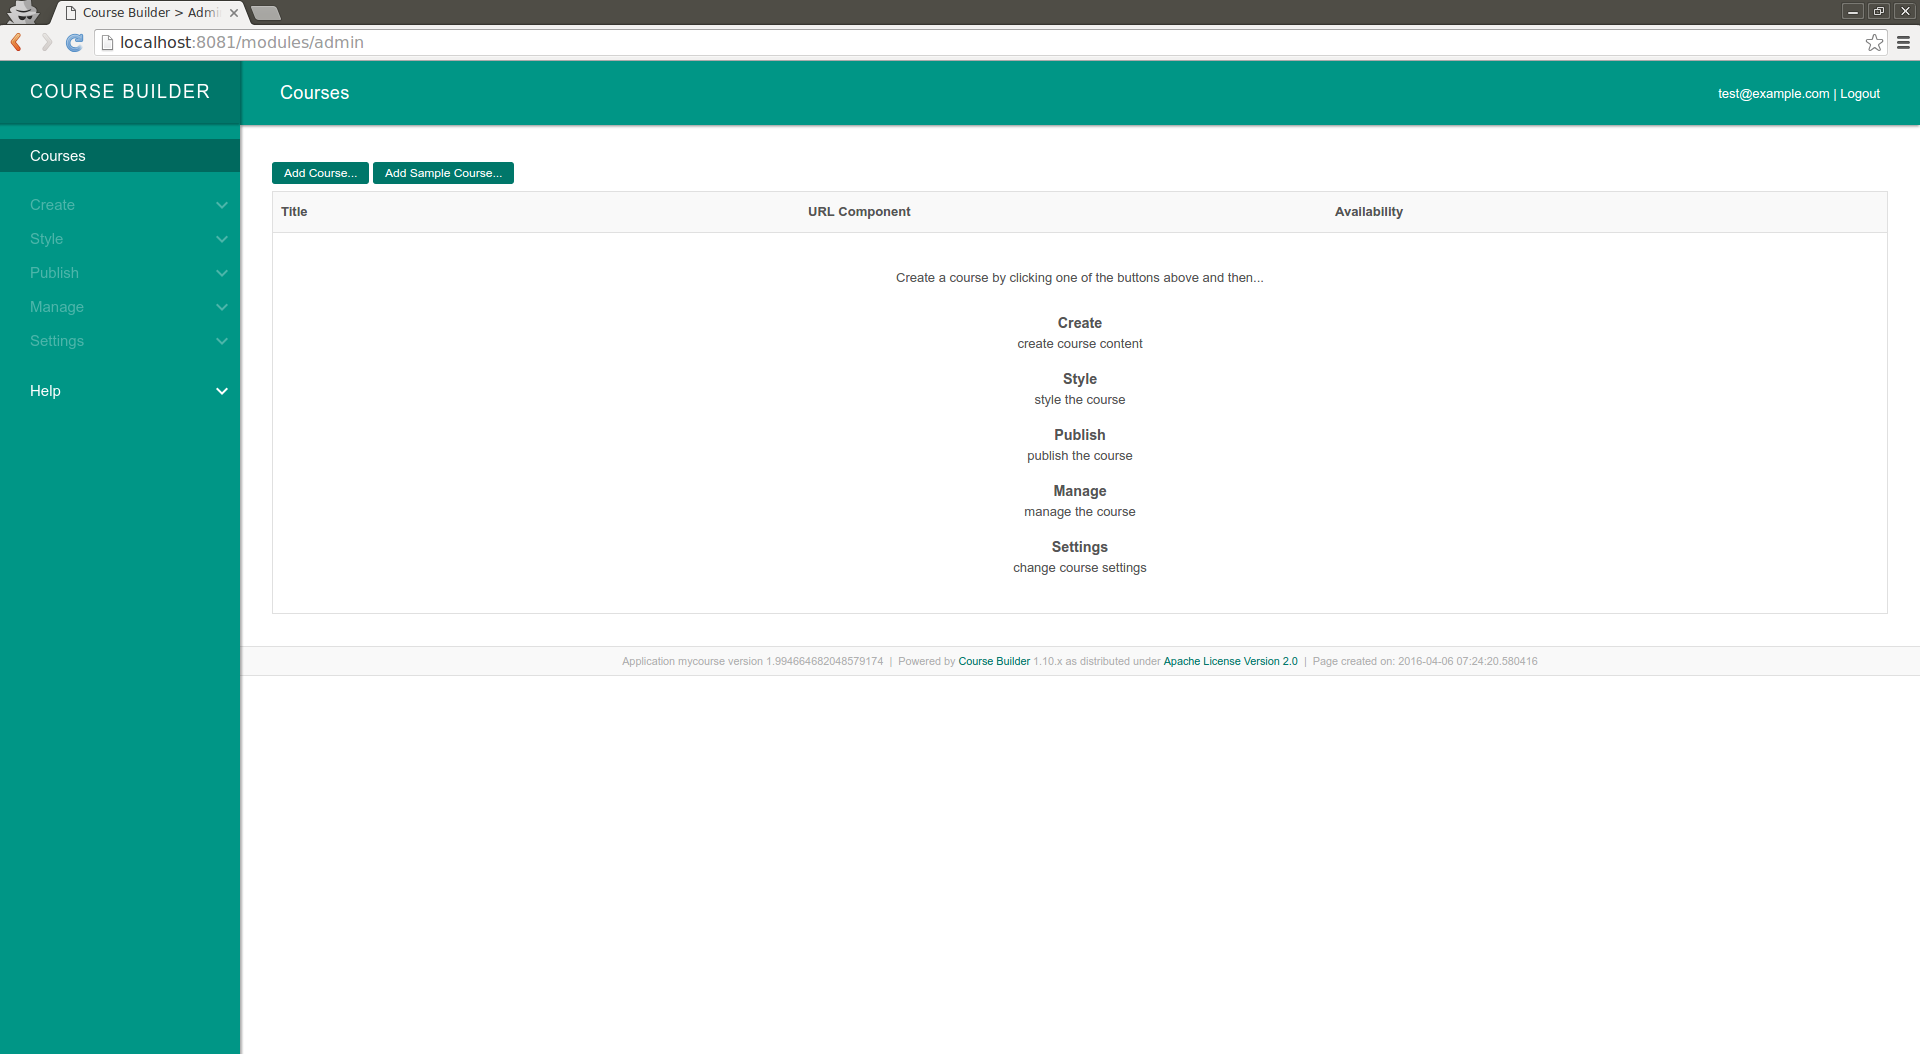 Home page of the Admin. Its empty as of now. It generally lists all the courses otherwise.